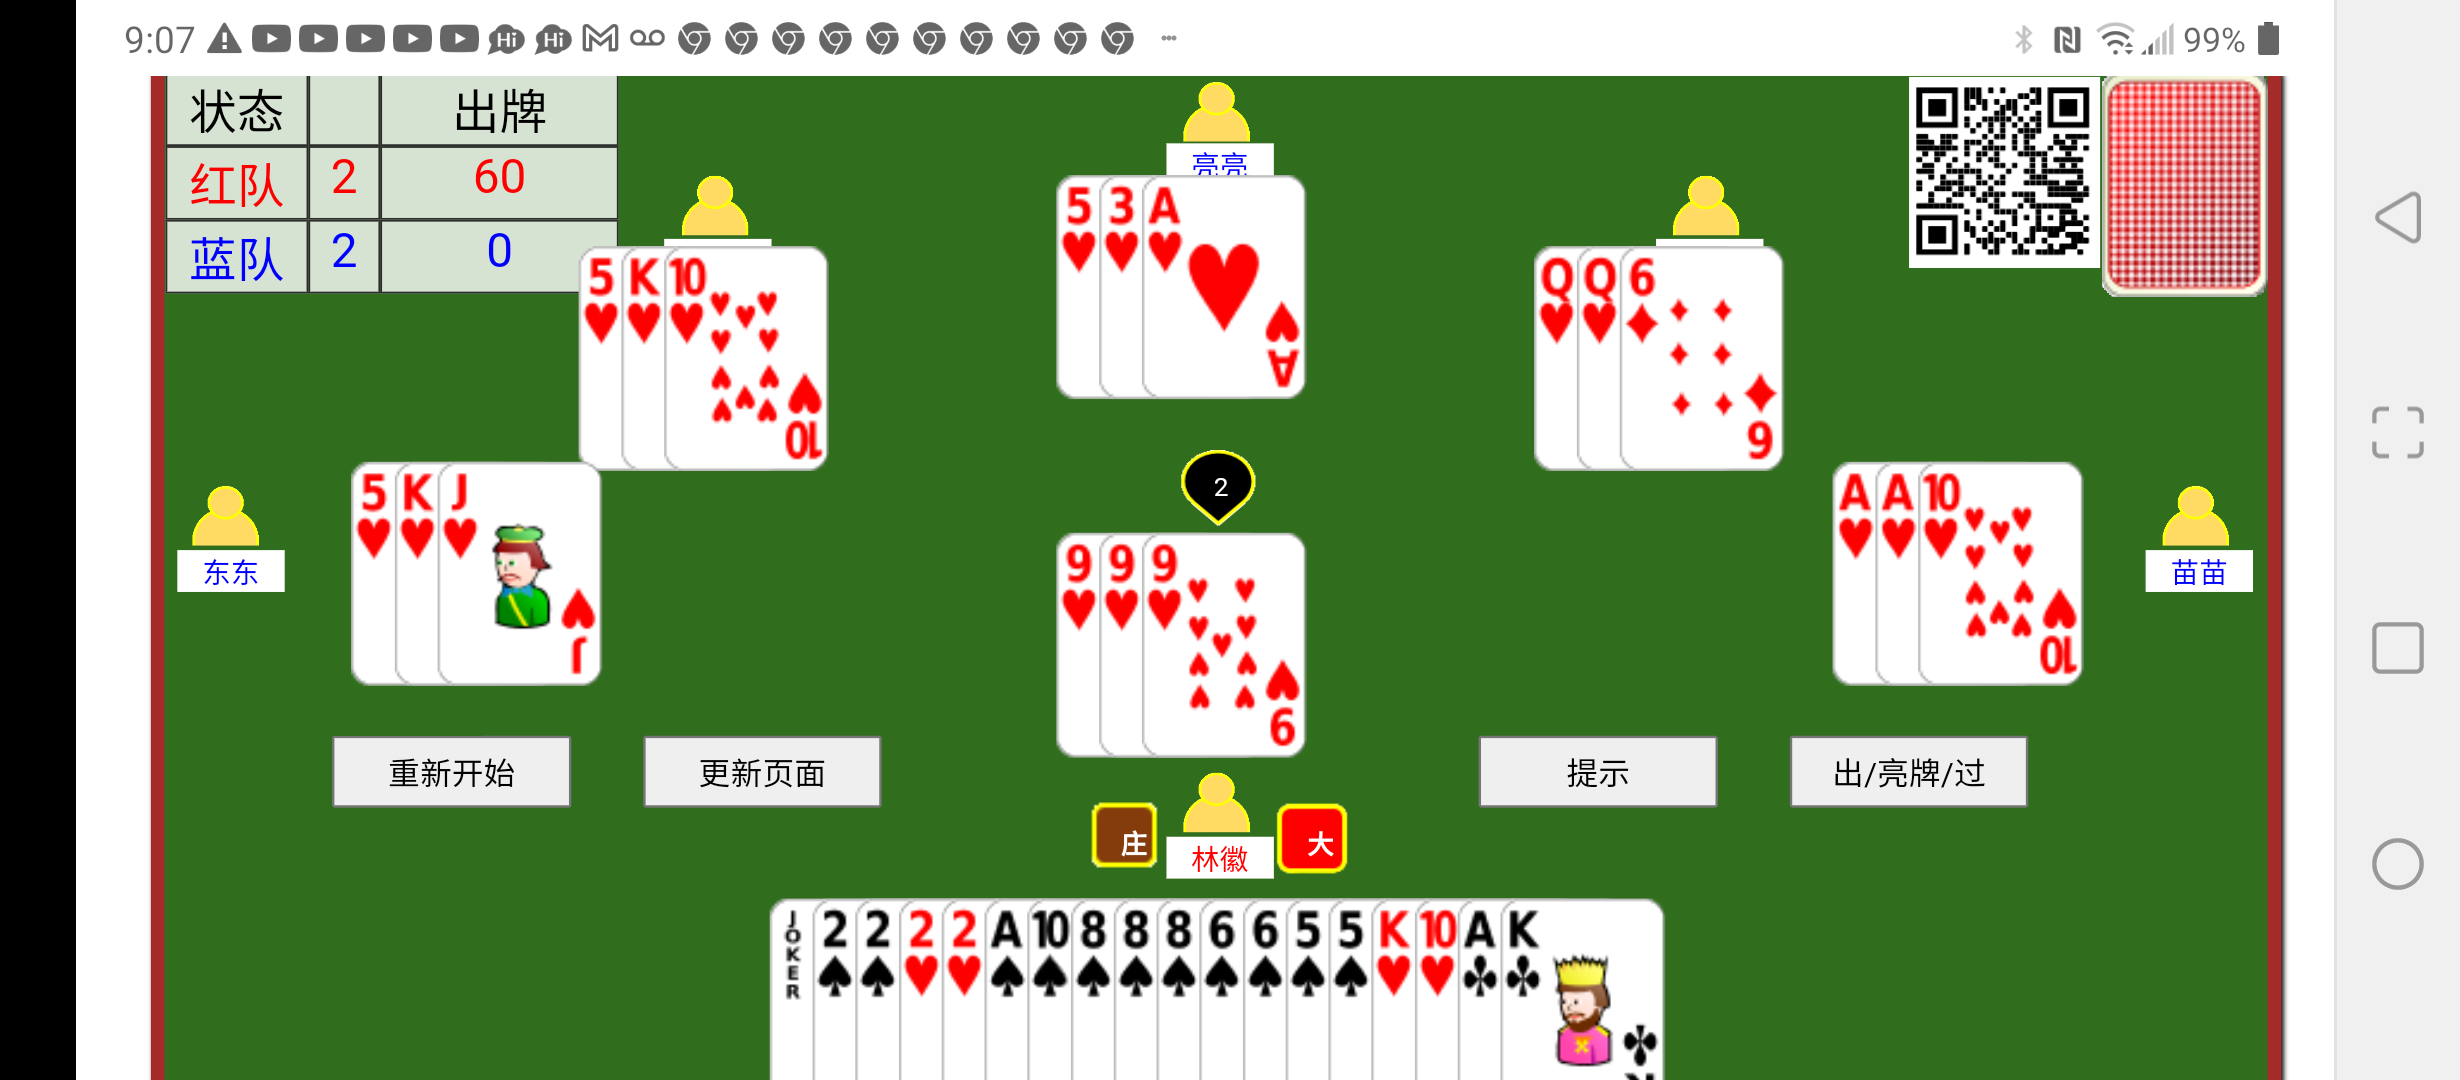 html5 tractor card game Screenshot_20220116-090703.png